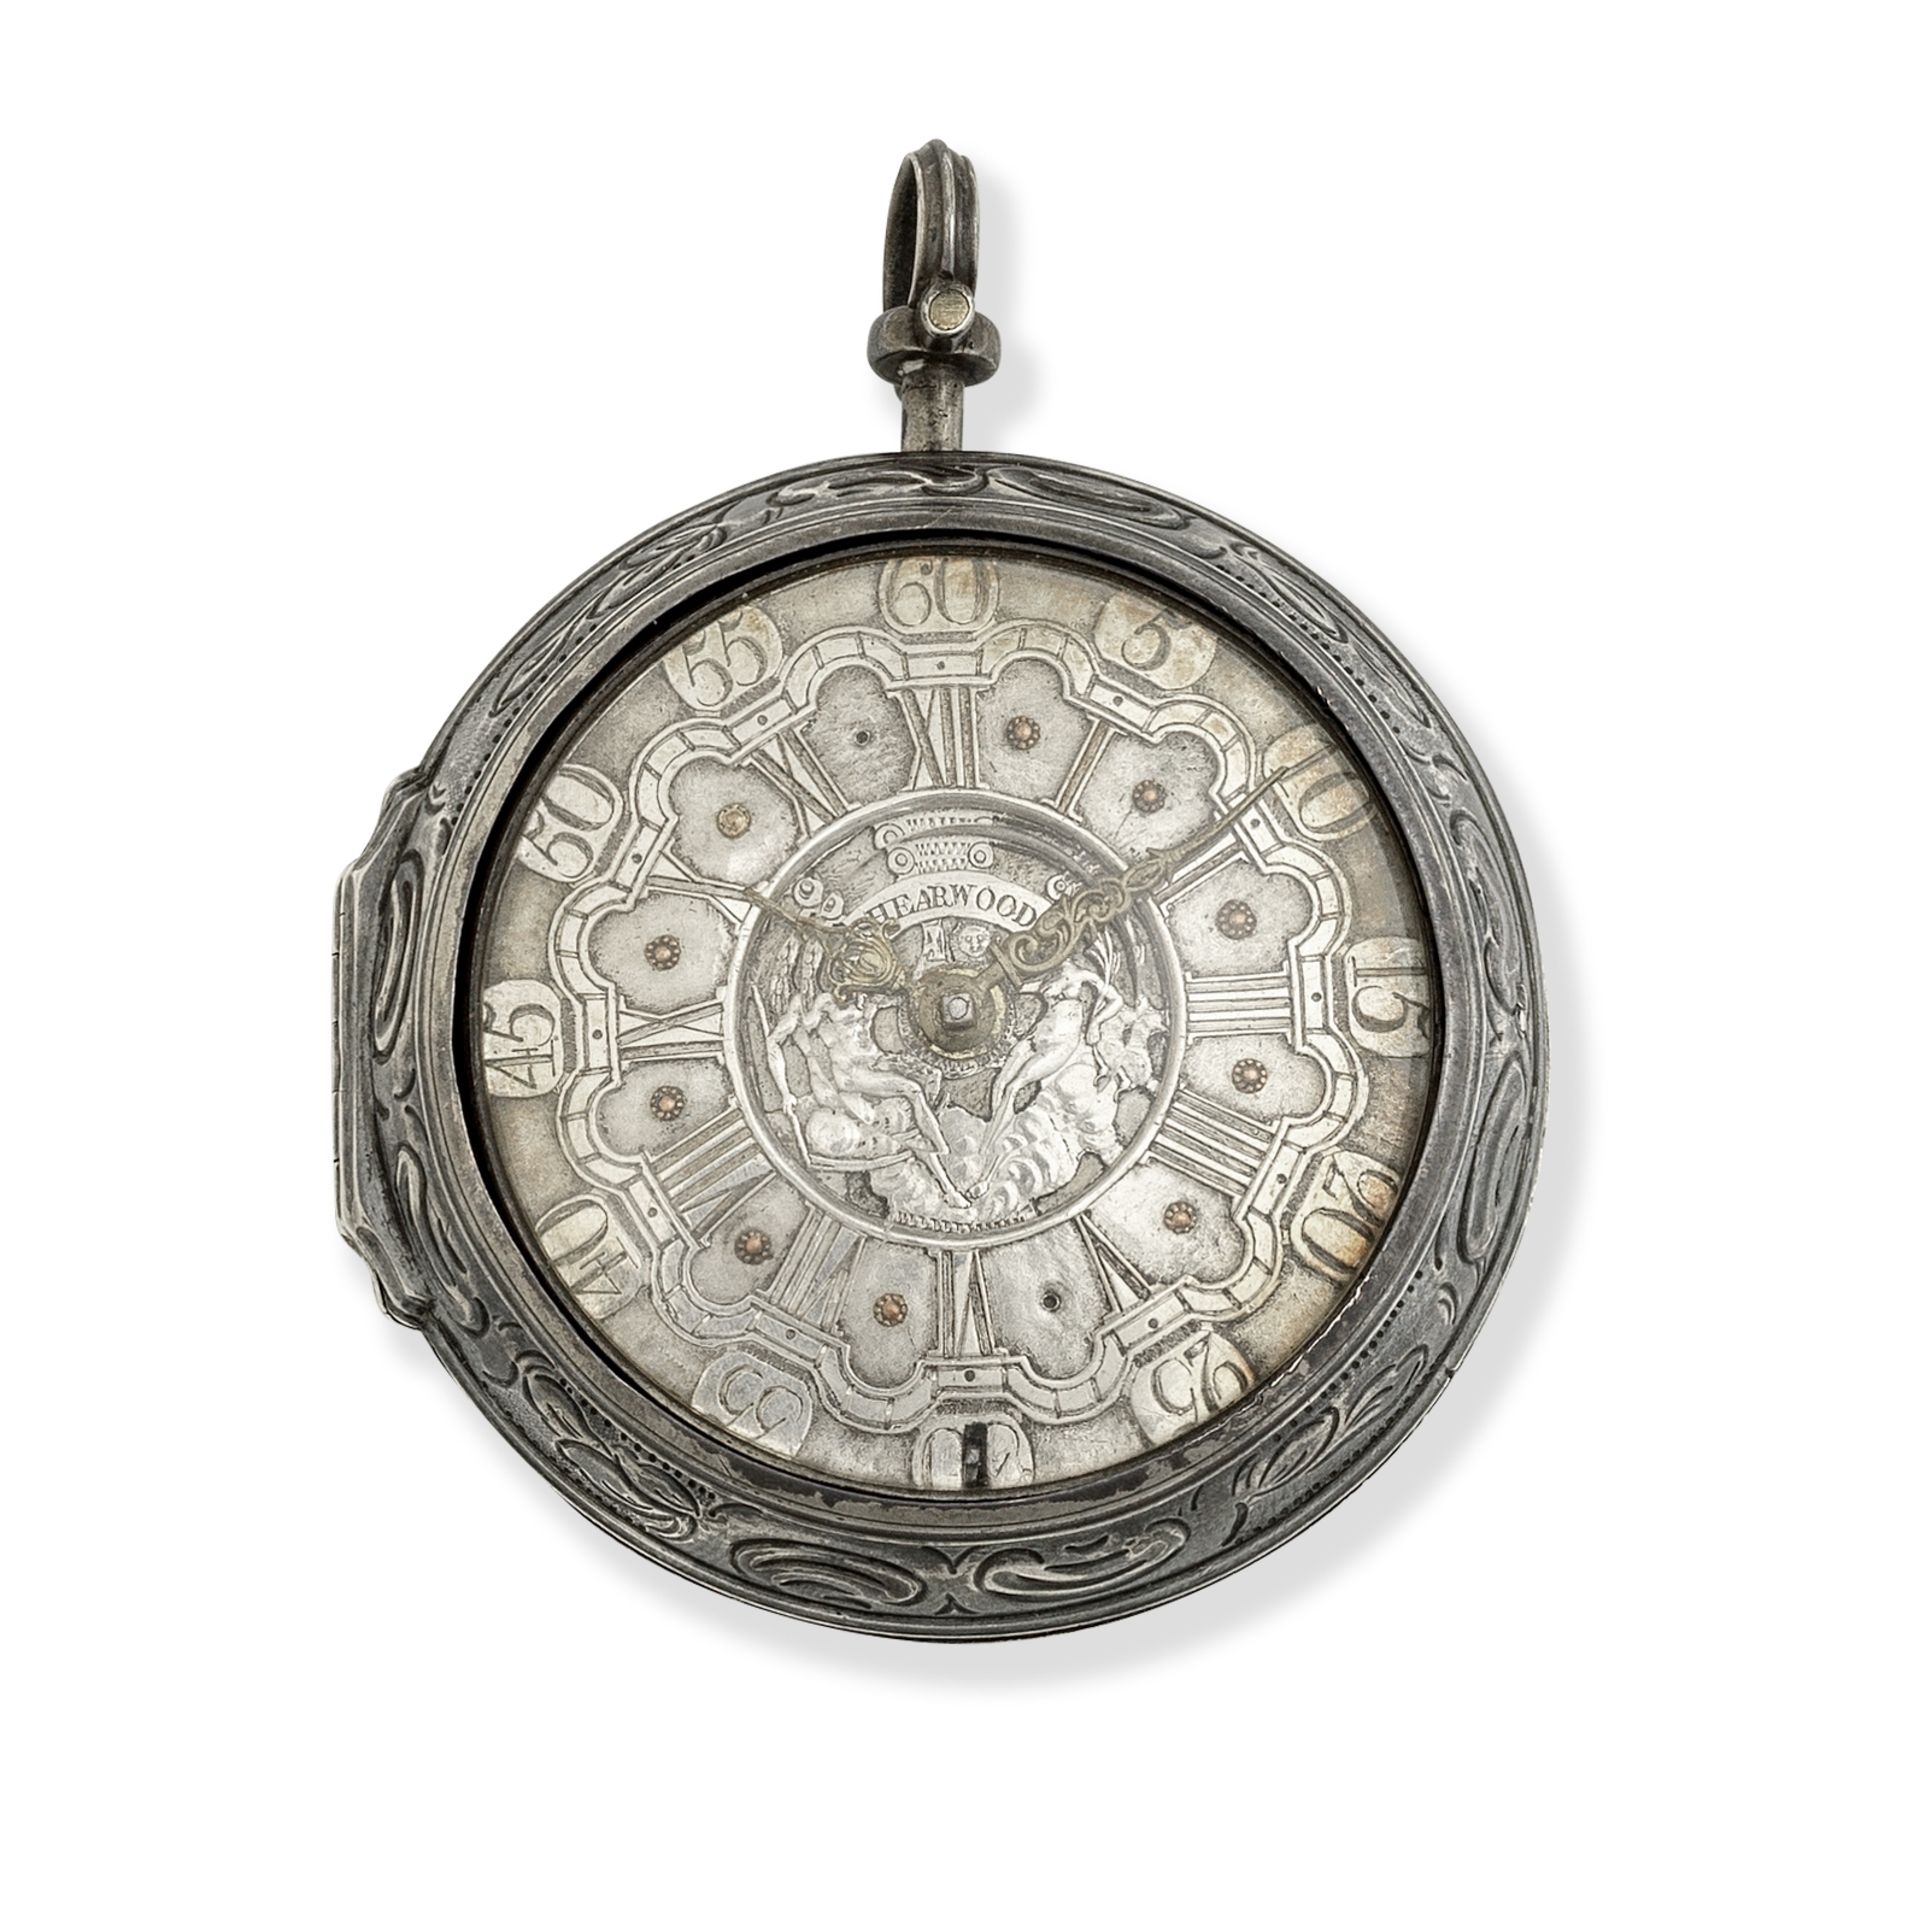 James Shearwood, London. A silver key wind pair case pocket watch with repousse decoration being ...